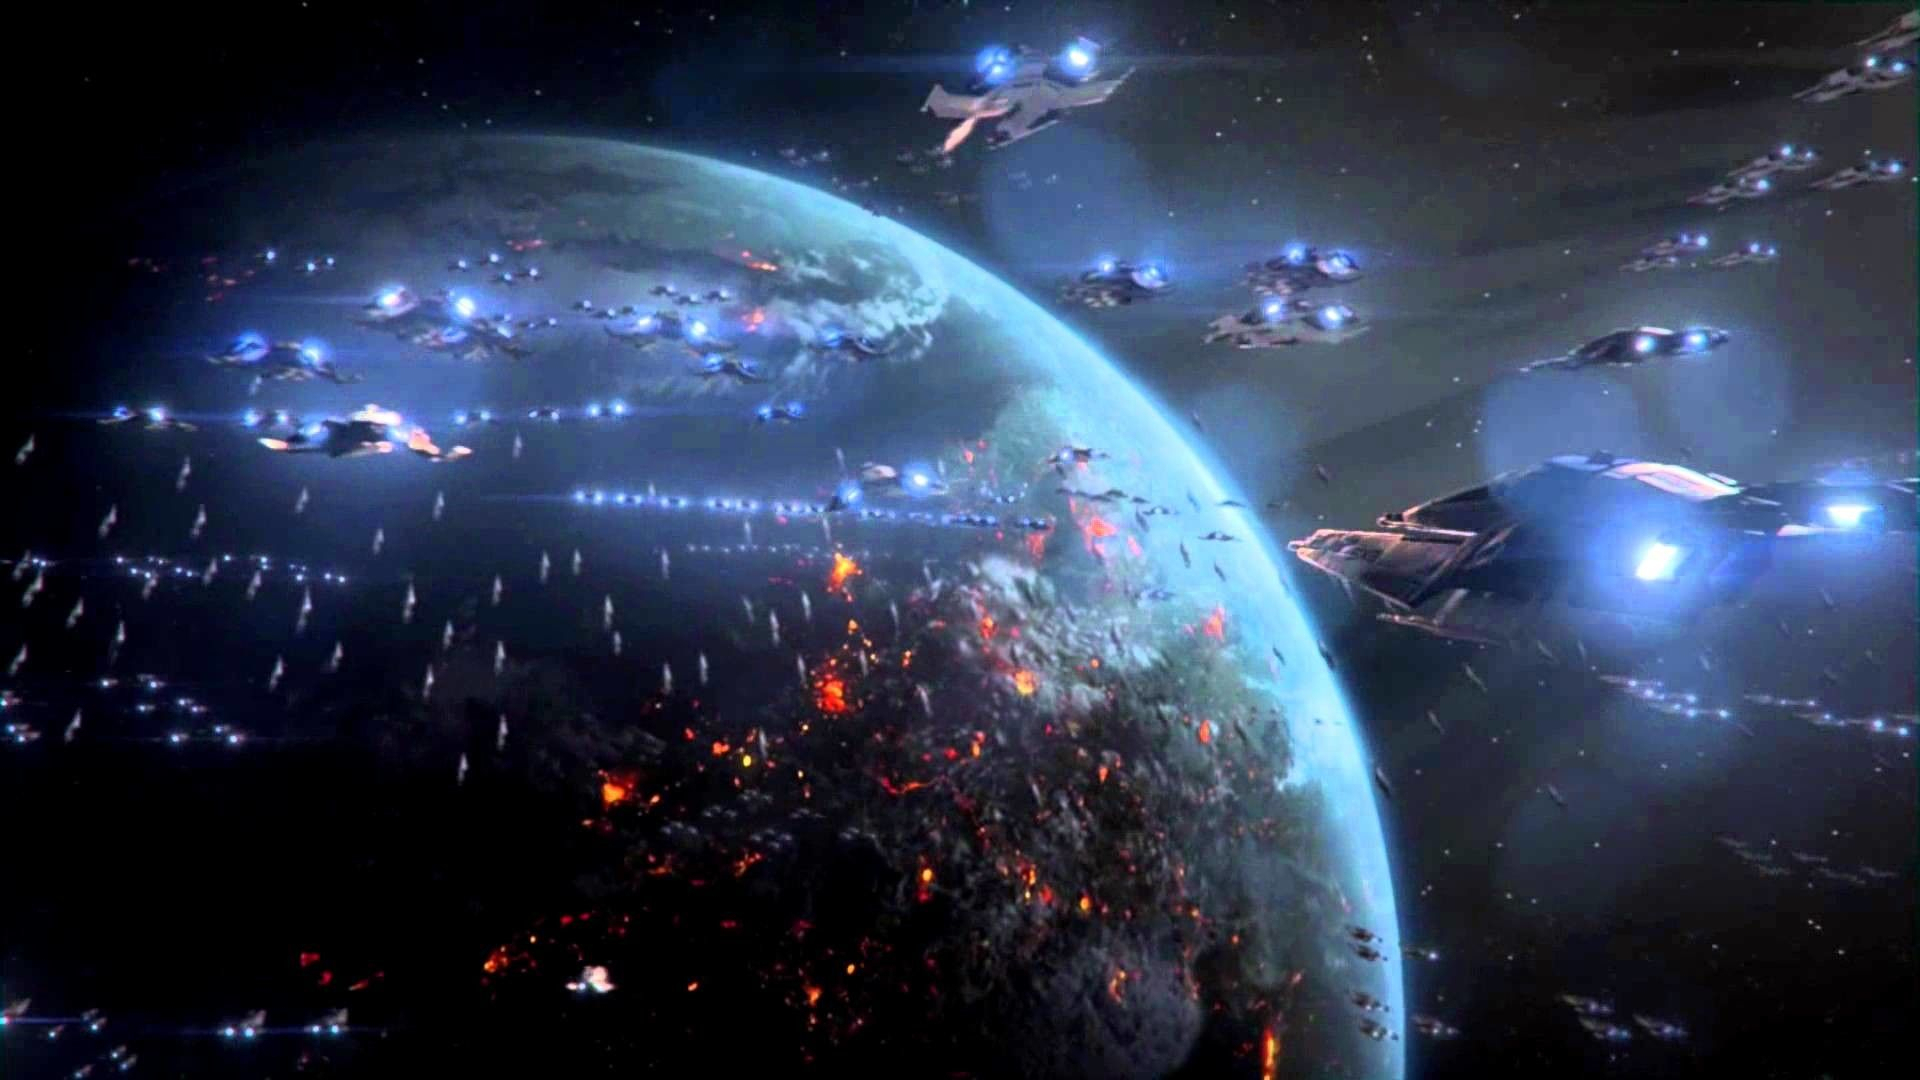 1920x1080 Ambient Wallpaper Space Battle posted by Michelle Johns